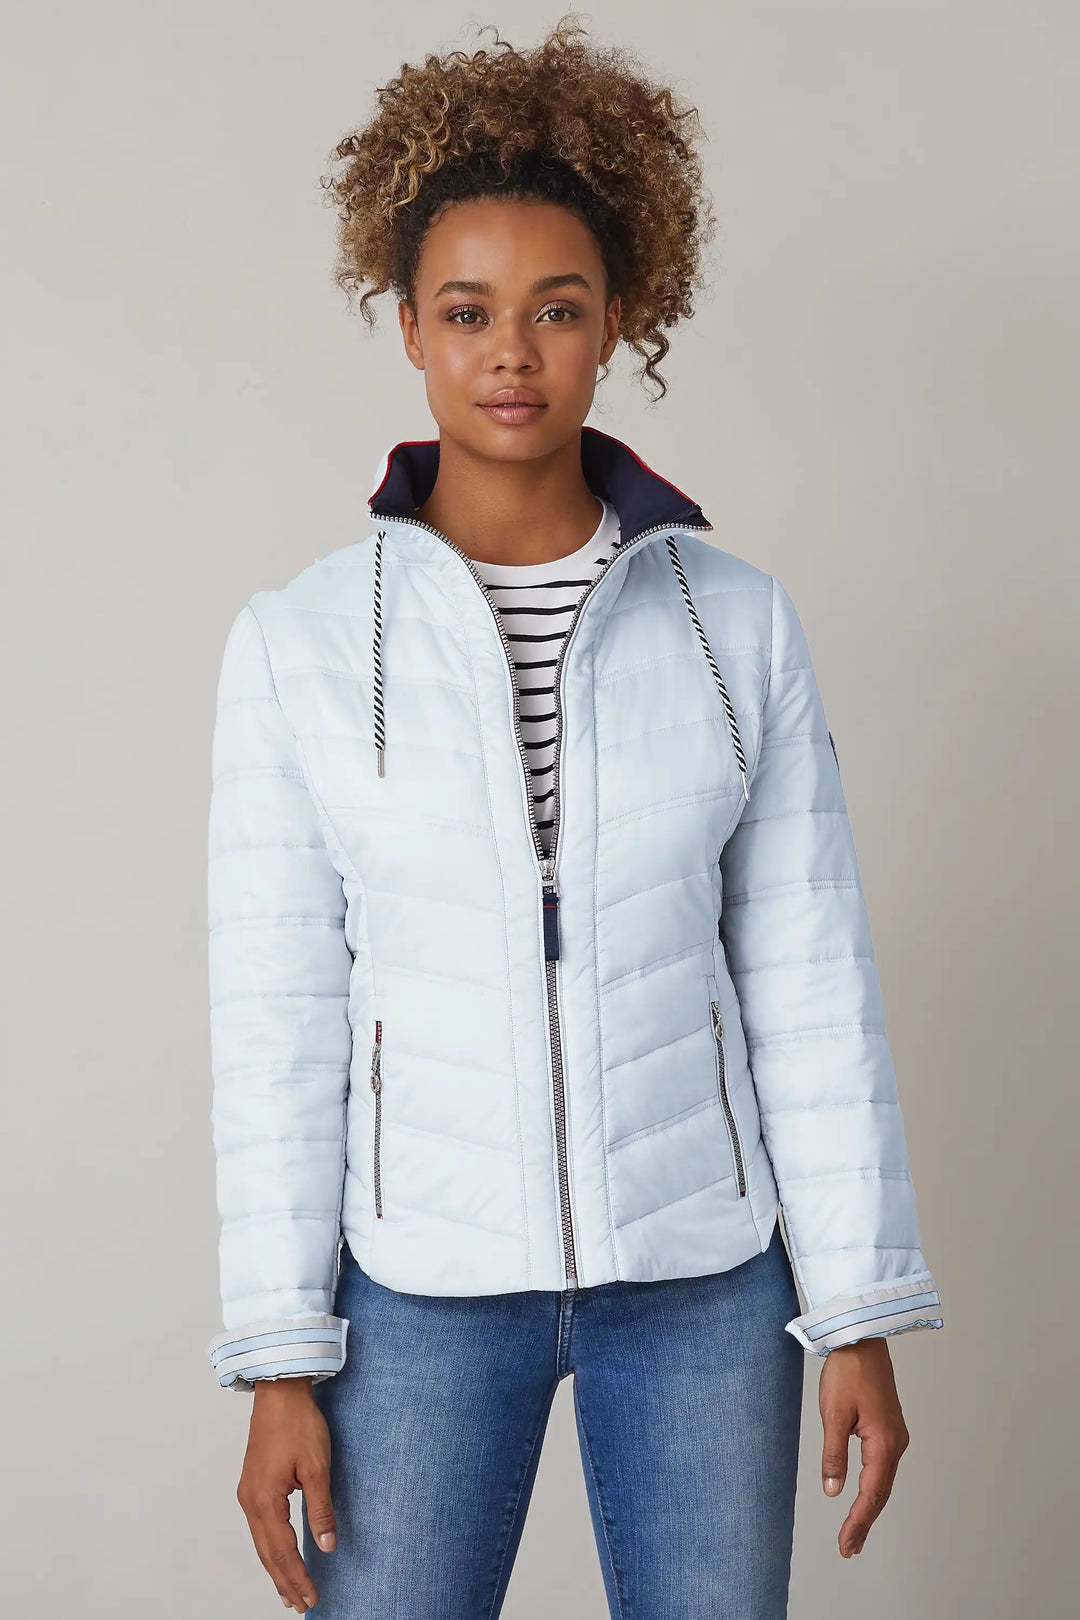 Model with curly hair wears a light blue quilted jacket with a front zipper, striped lining, and contrasting navy and red details on collar and cuffs, paired with a striped shirt and jeans, style 0124-2454-66-51